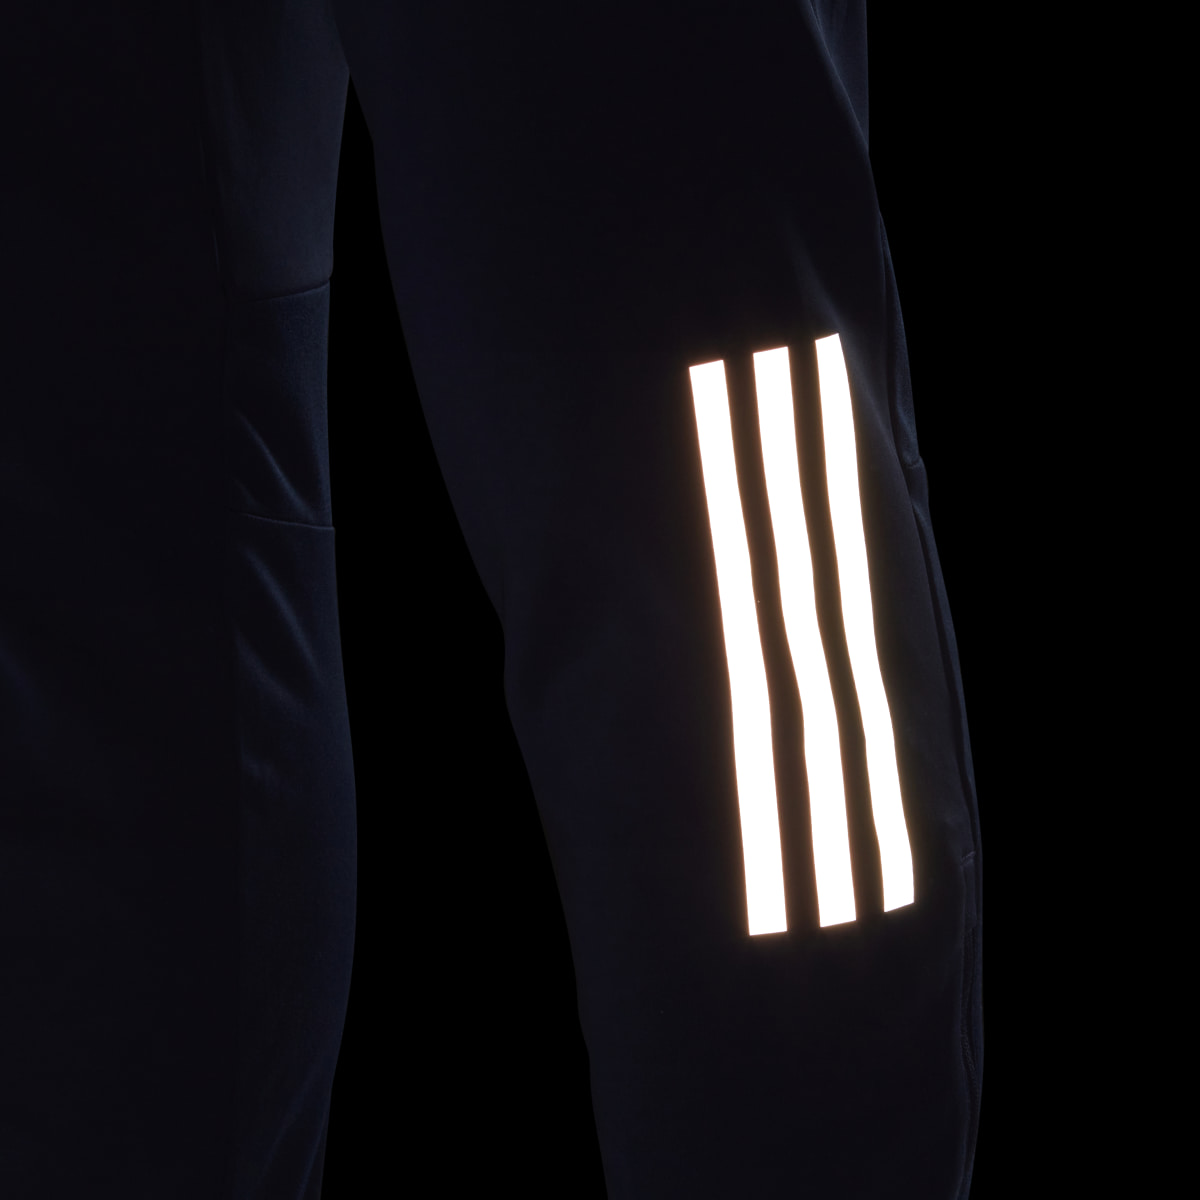 Adidas Own the Run Astro Knit Pants. 6